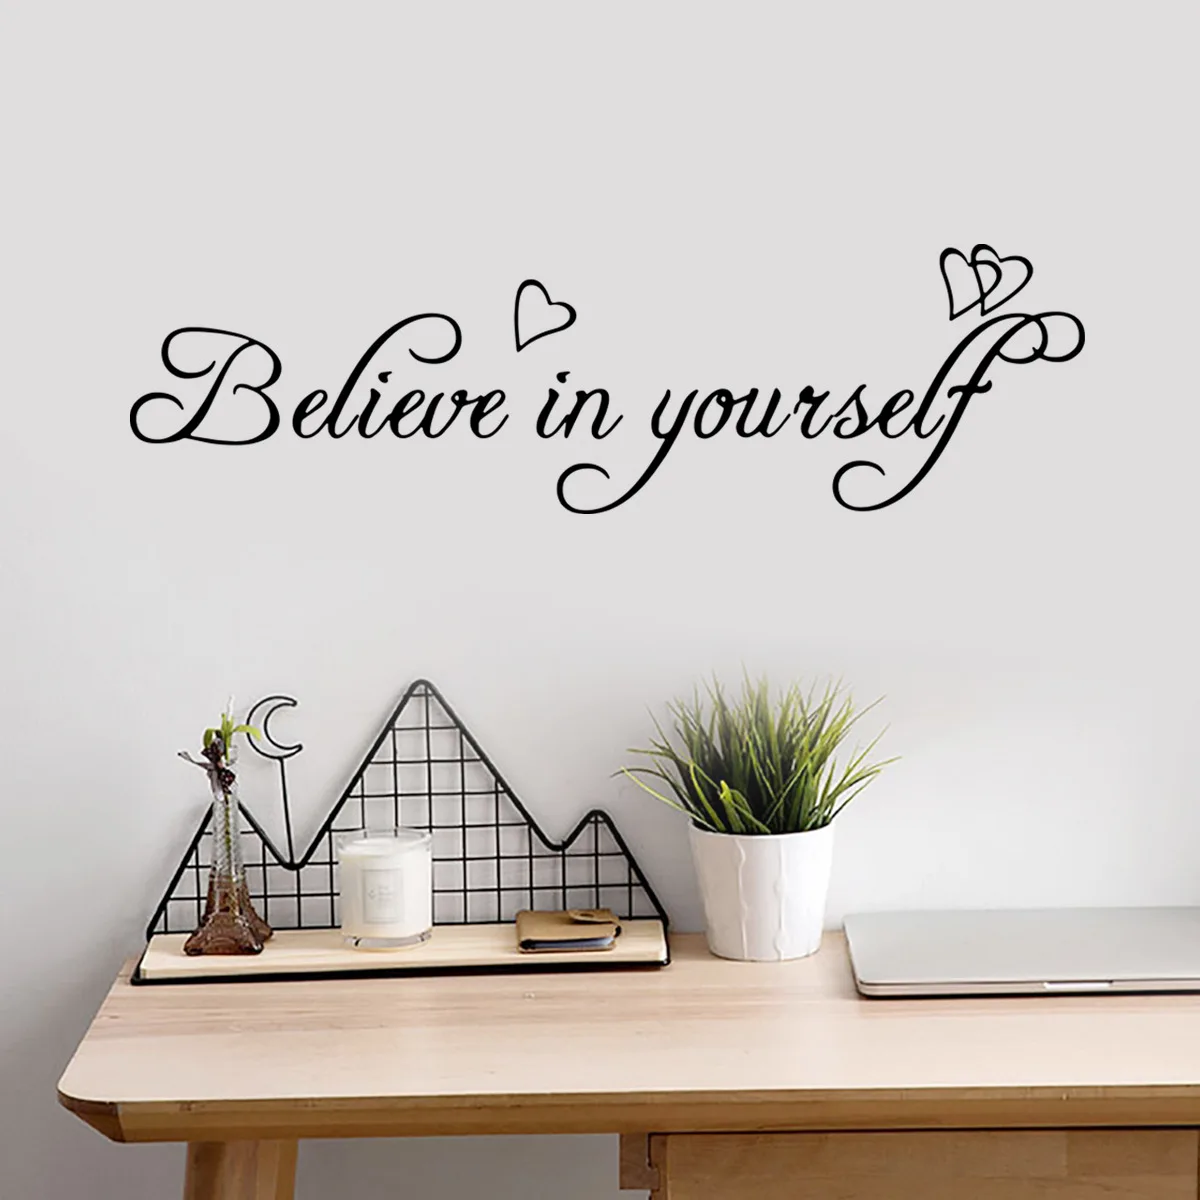 15*45cm English Inspirational Slogan Believe In Yourself Wall Sticker Background Wall  Living Room Decoration Mural Wall Sticker